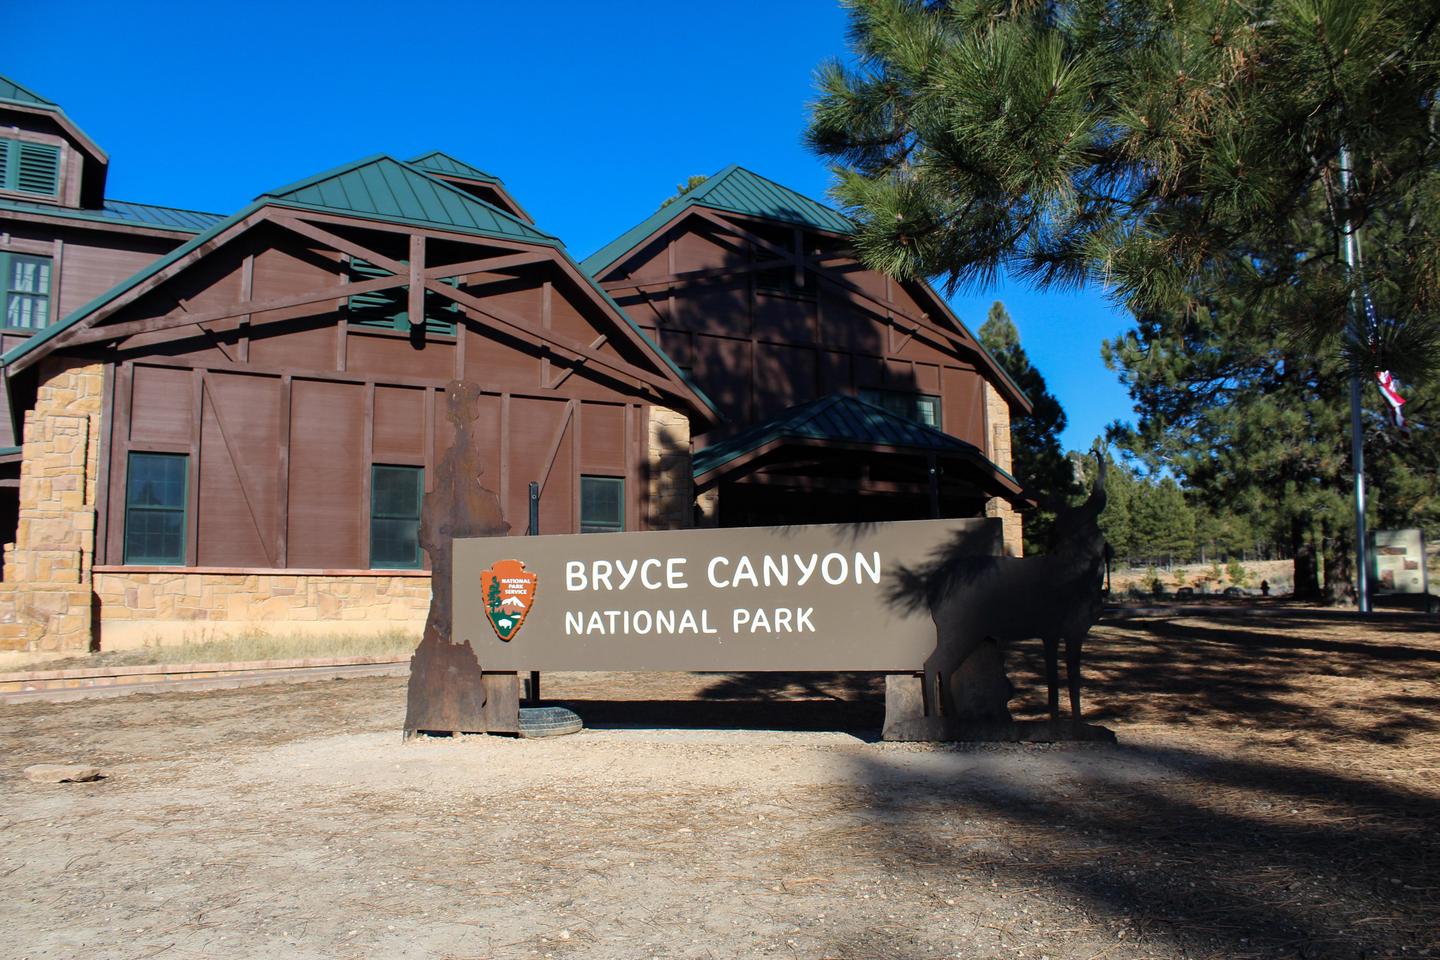 Bryce Canyon Visitor CenterThe park Visitor Center is located 1 mile past the park entrance and is open most days at 8 a.m.